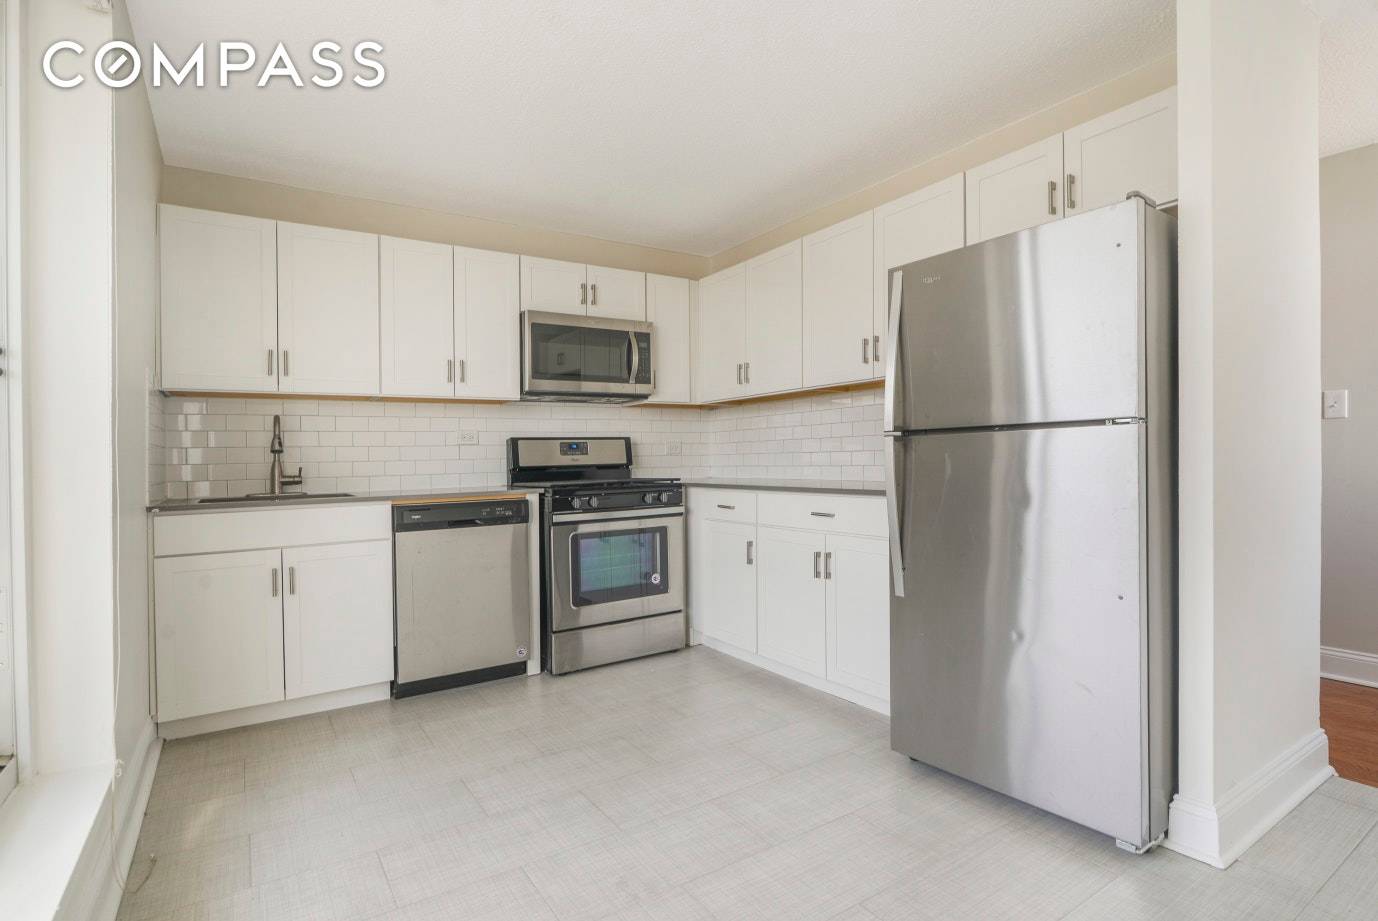 Newly renovated two bedroom apartment with ample closet space, the master bedroom can easily fit a king size bed, the second bedroom can fit the queen size bed.